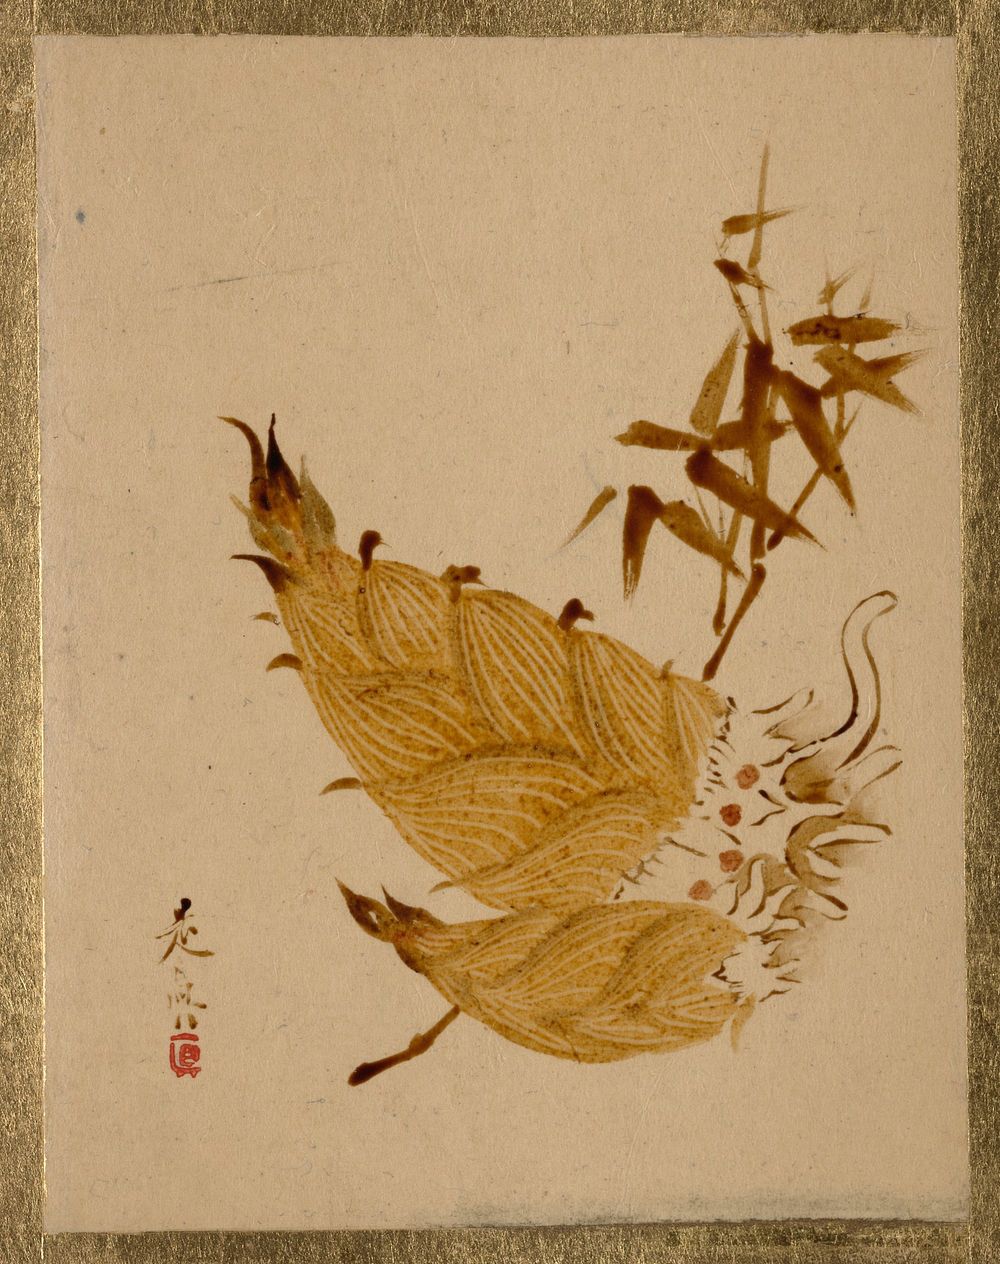 Bamboo Shoots. Original public domain image from the MET museum.